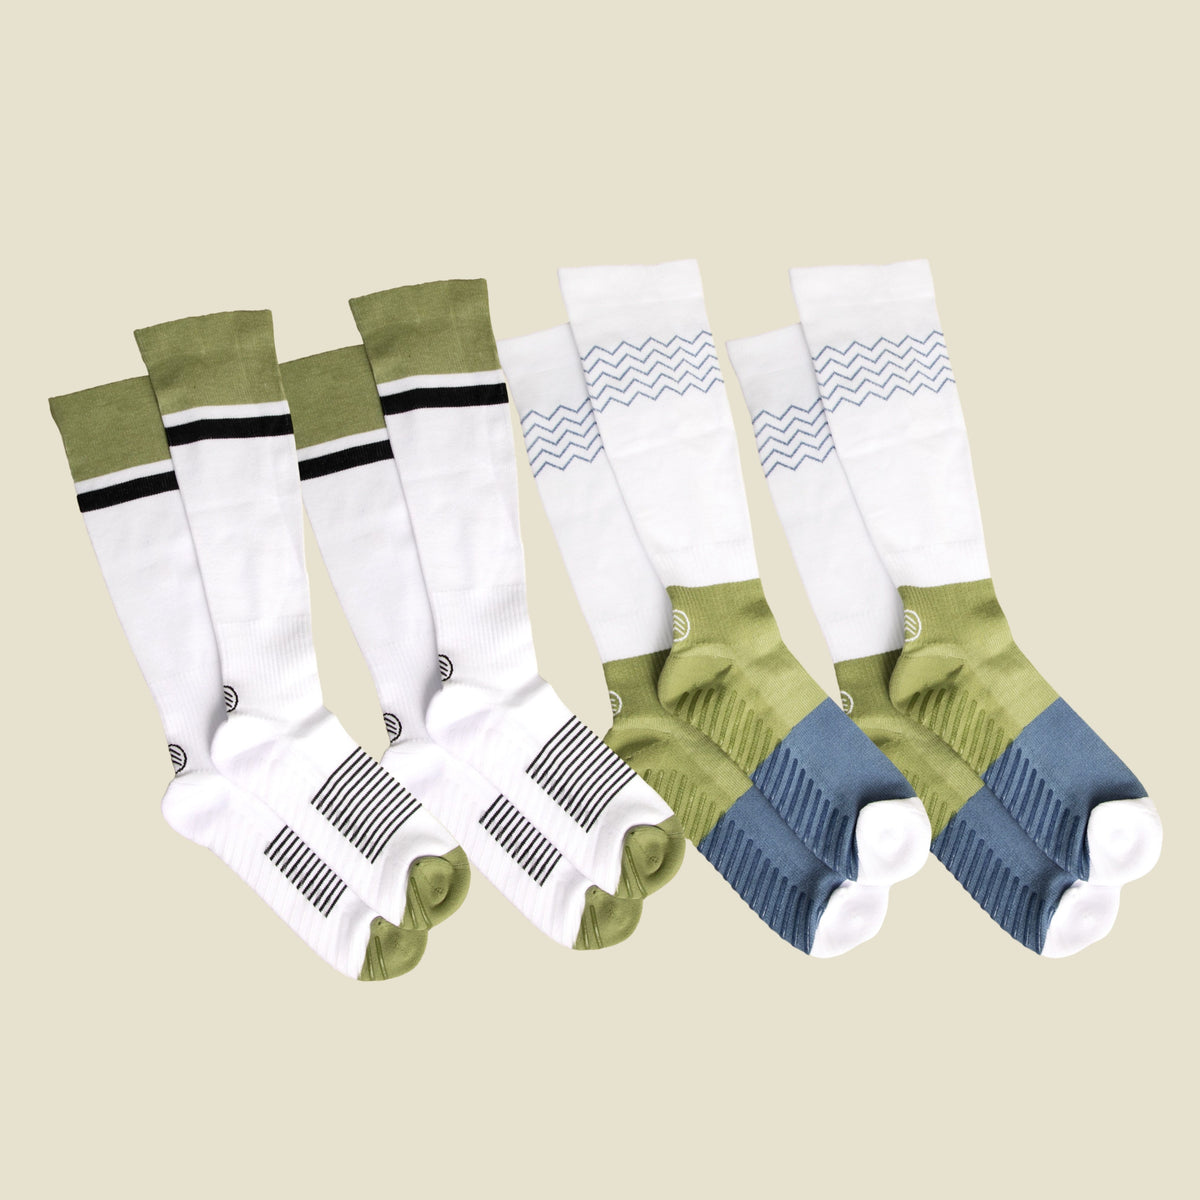 Women&#39;s White/Blue/Green Compression Socks with Grips Variety Pack - 4 Pairs - Gripjoy Socks